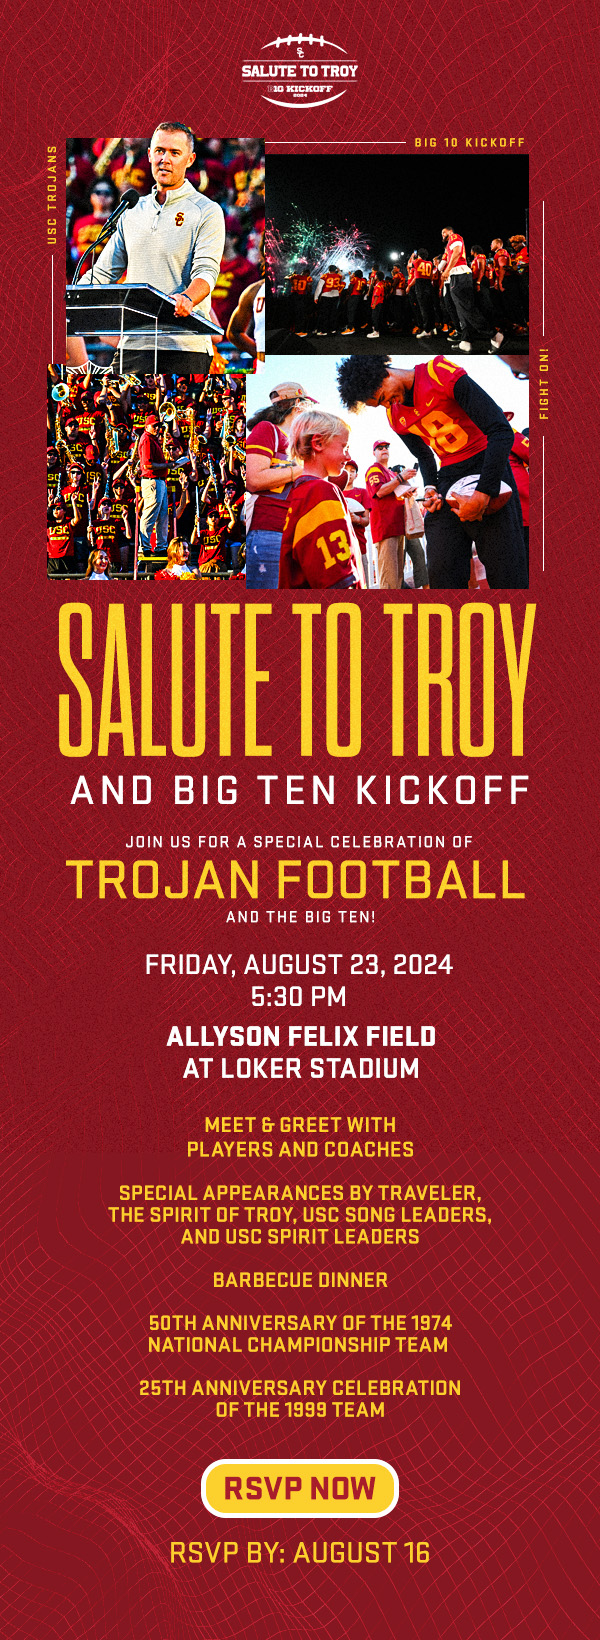 Salute To Troy 2024